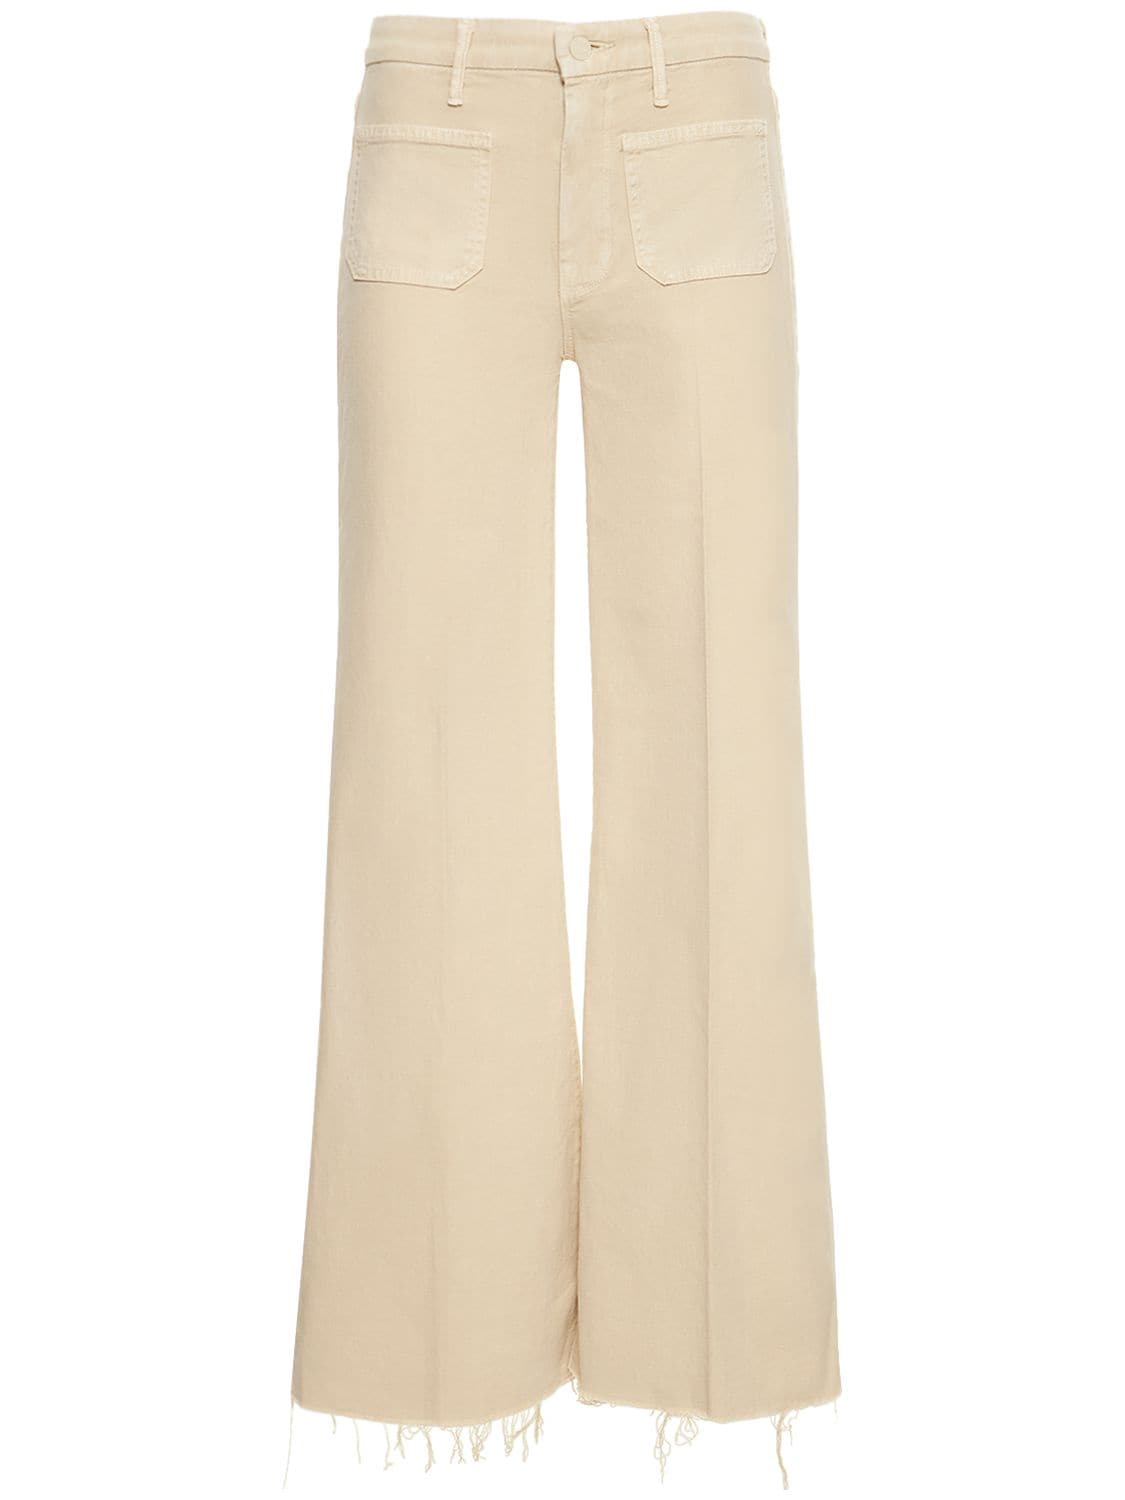 Mother - The patch pocket roller fray jeans - Beige | Luisaviaroma